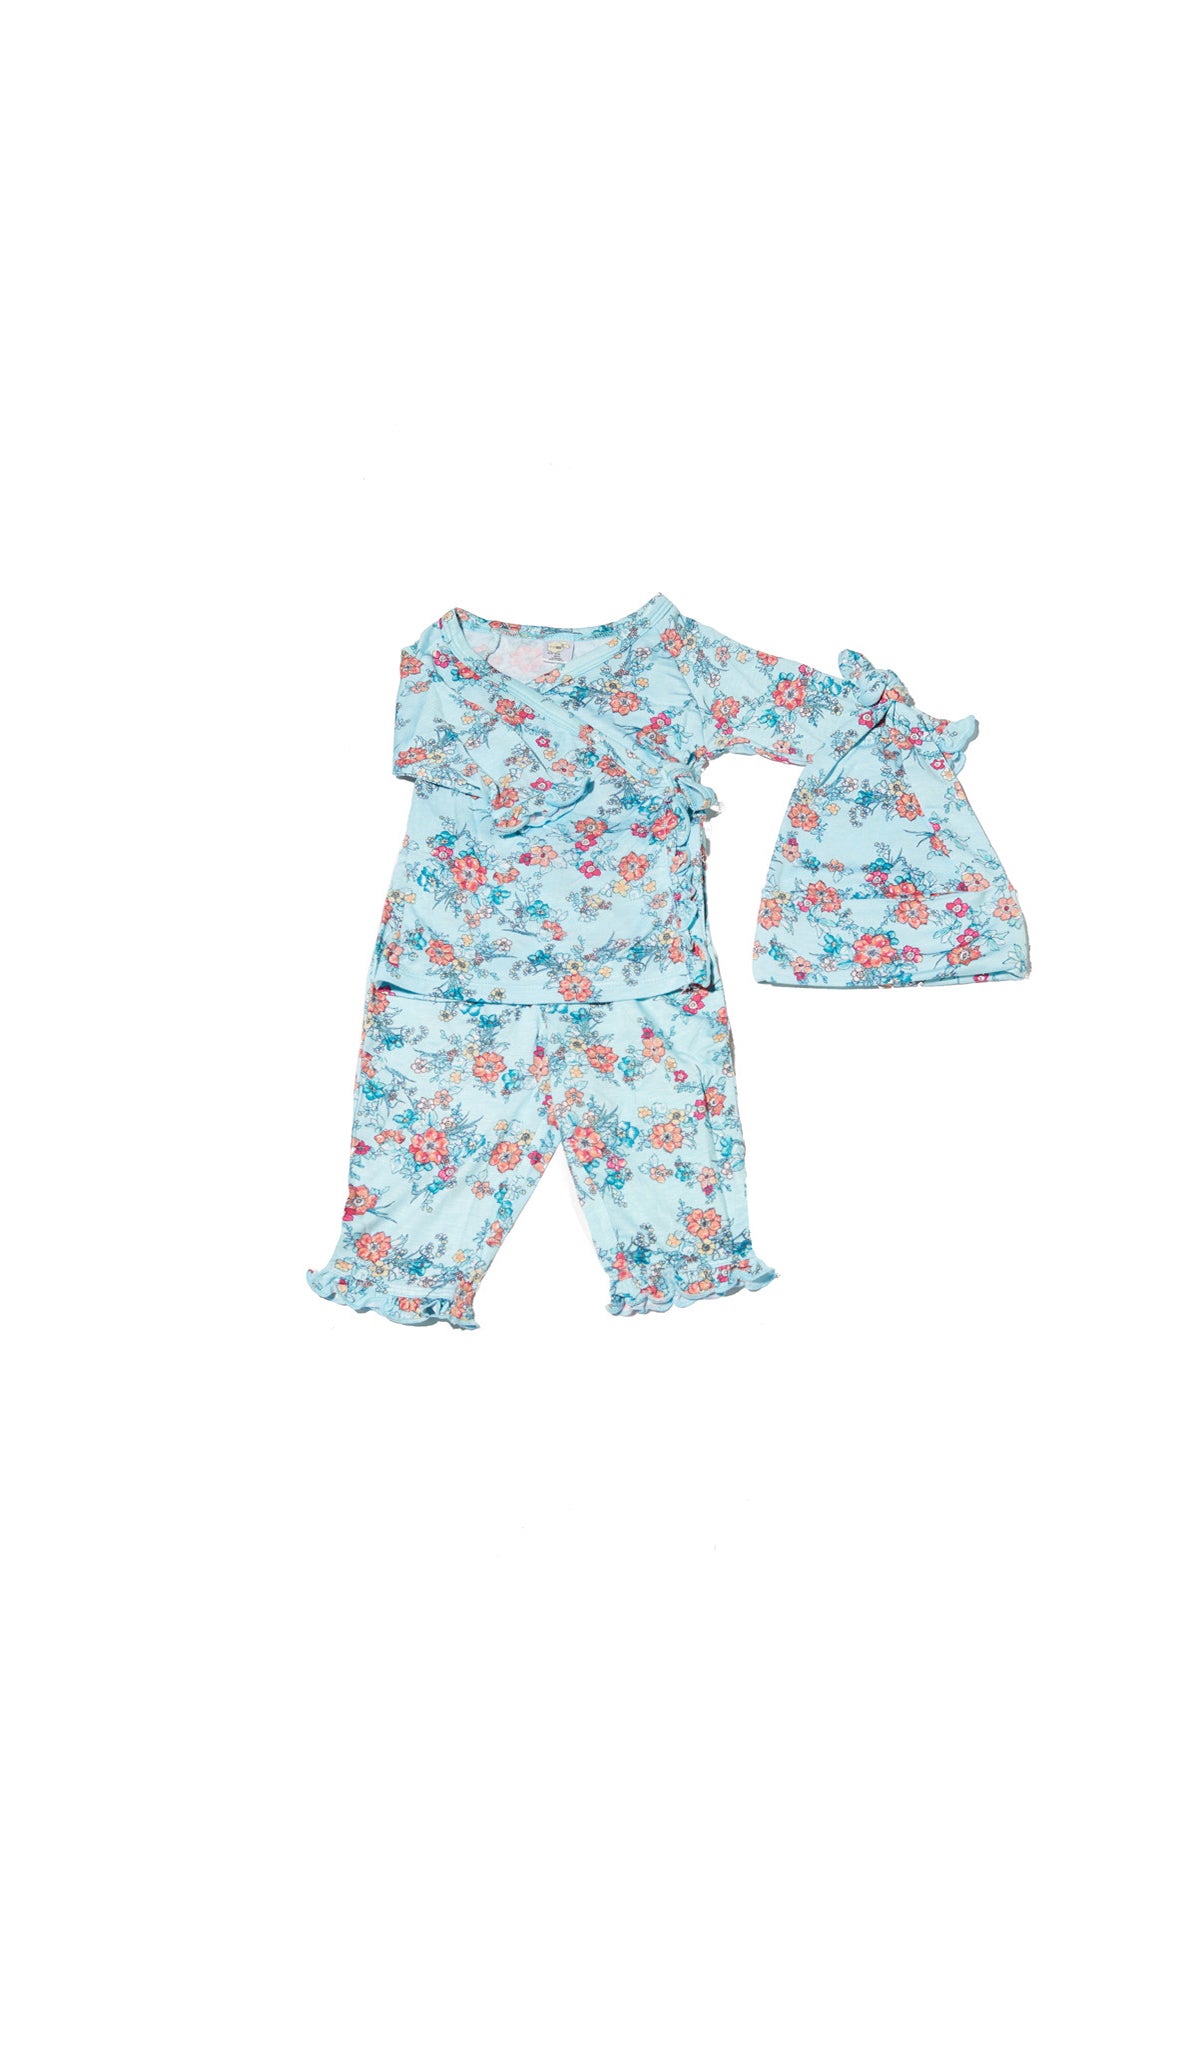 Azure Mist Baby's Ruffle Take-Me-Home 3 Piece set flat shot showing long sleeve kimono top and pant with ruffle trim, and matching knotted baby hat. 